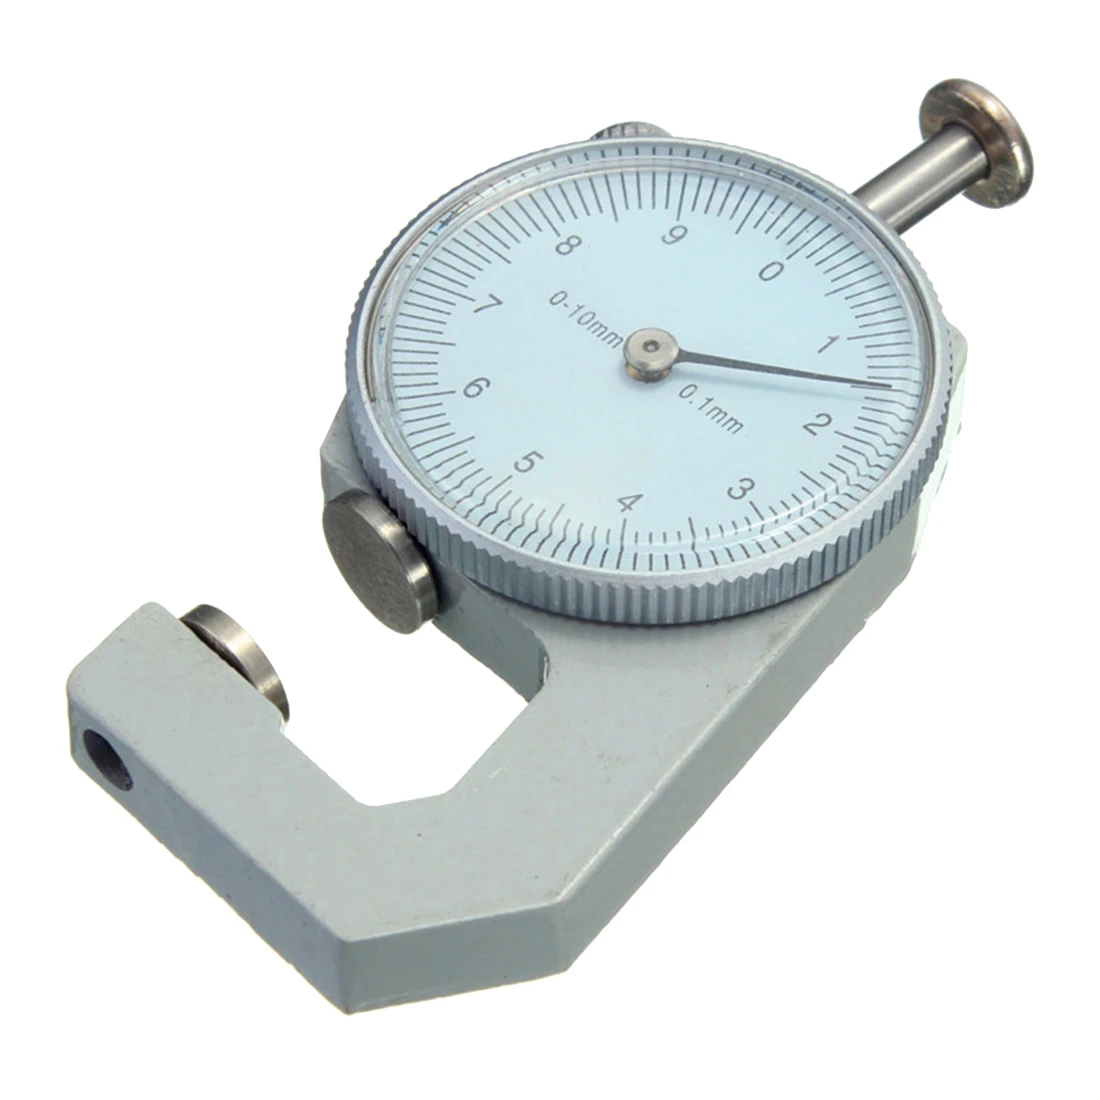 0-10mm Thickness Gauge Tester Leather Craft Leathercraft Tools Measuring 